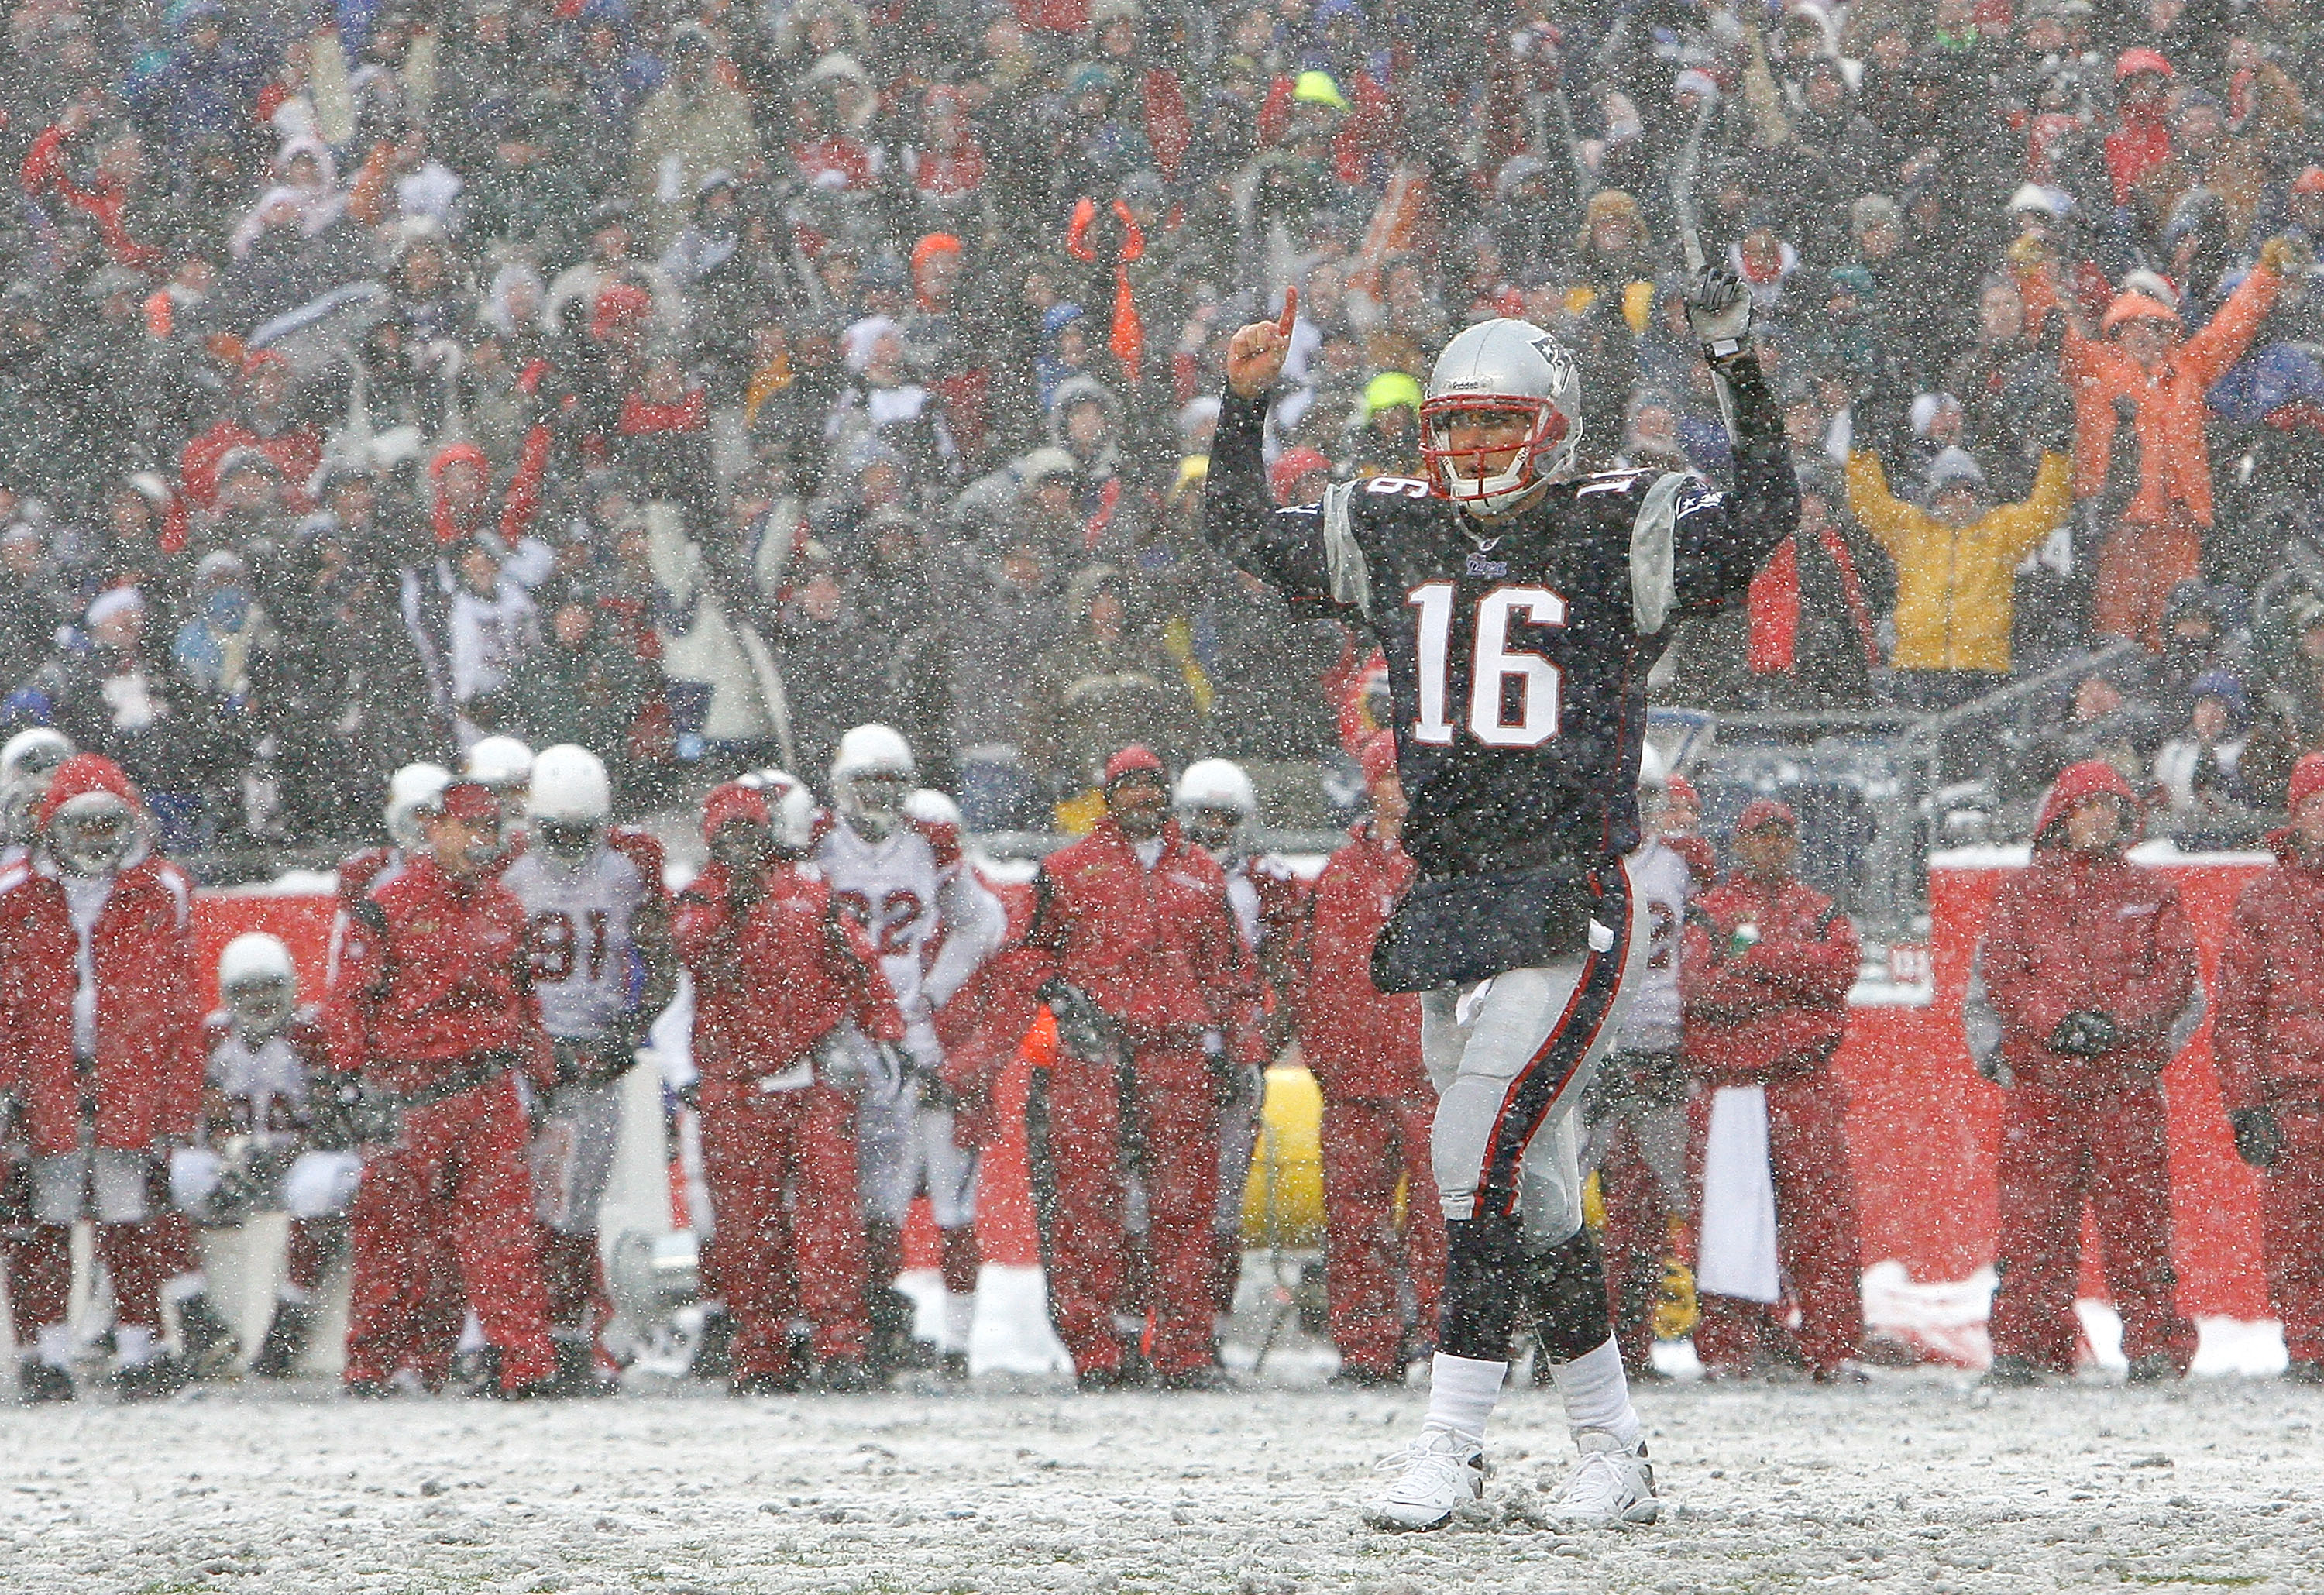 Matt Cassell of the New England Patriots reacts after a touchdown against the Arizona Cardinals at Gillette Stadium on December 21, 2008. The Patriots won 47-7. (Photo by Jim Rogash/Getty Images)